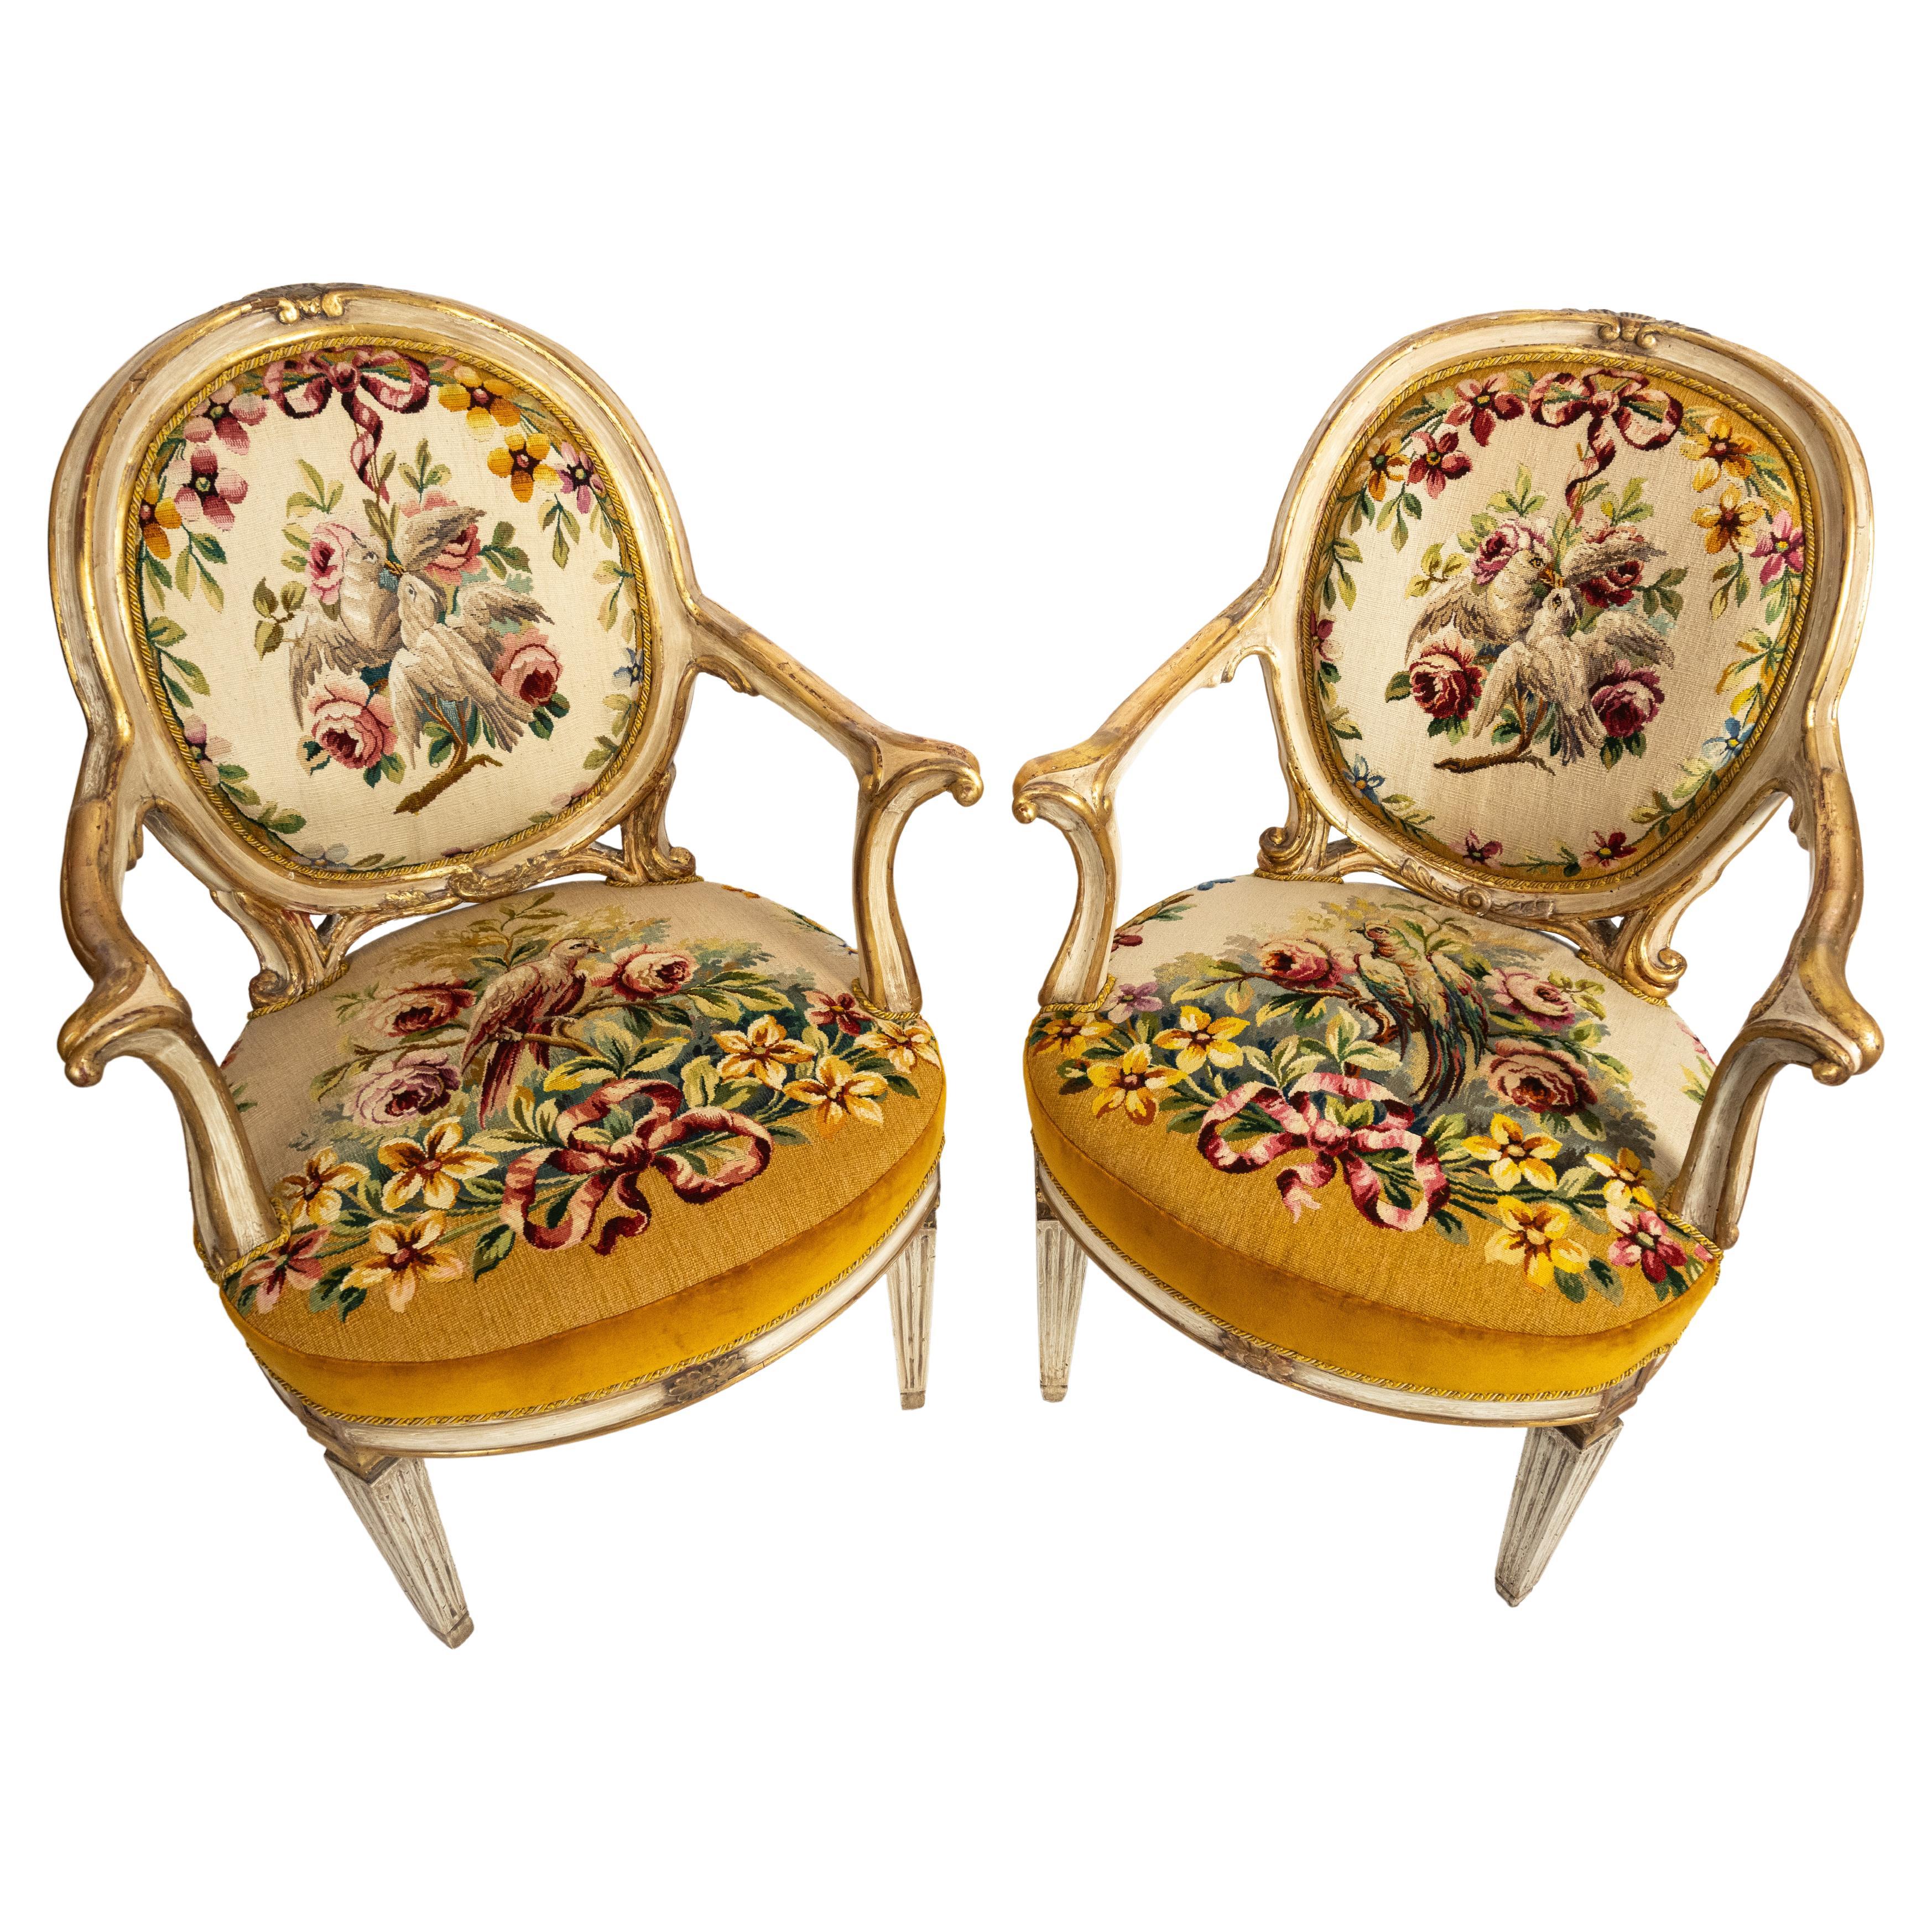 A pair of Italian Neoclassical open arm chairs with carved white painted frames having gilt details. The oval chairbacks and seats are upholstered with French Aubusson tapestry, having polychrome floral and bird motifs accented by bows. The frames